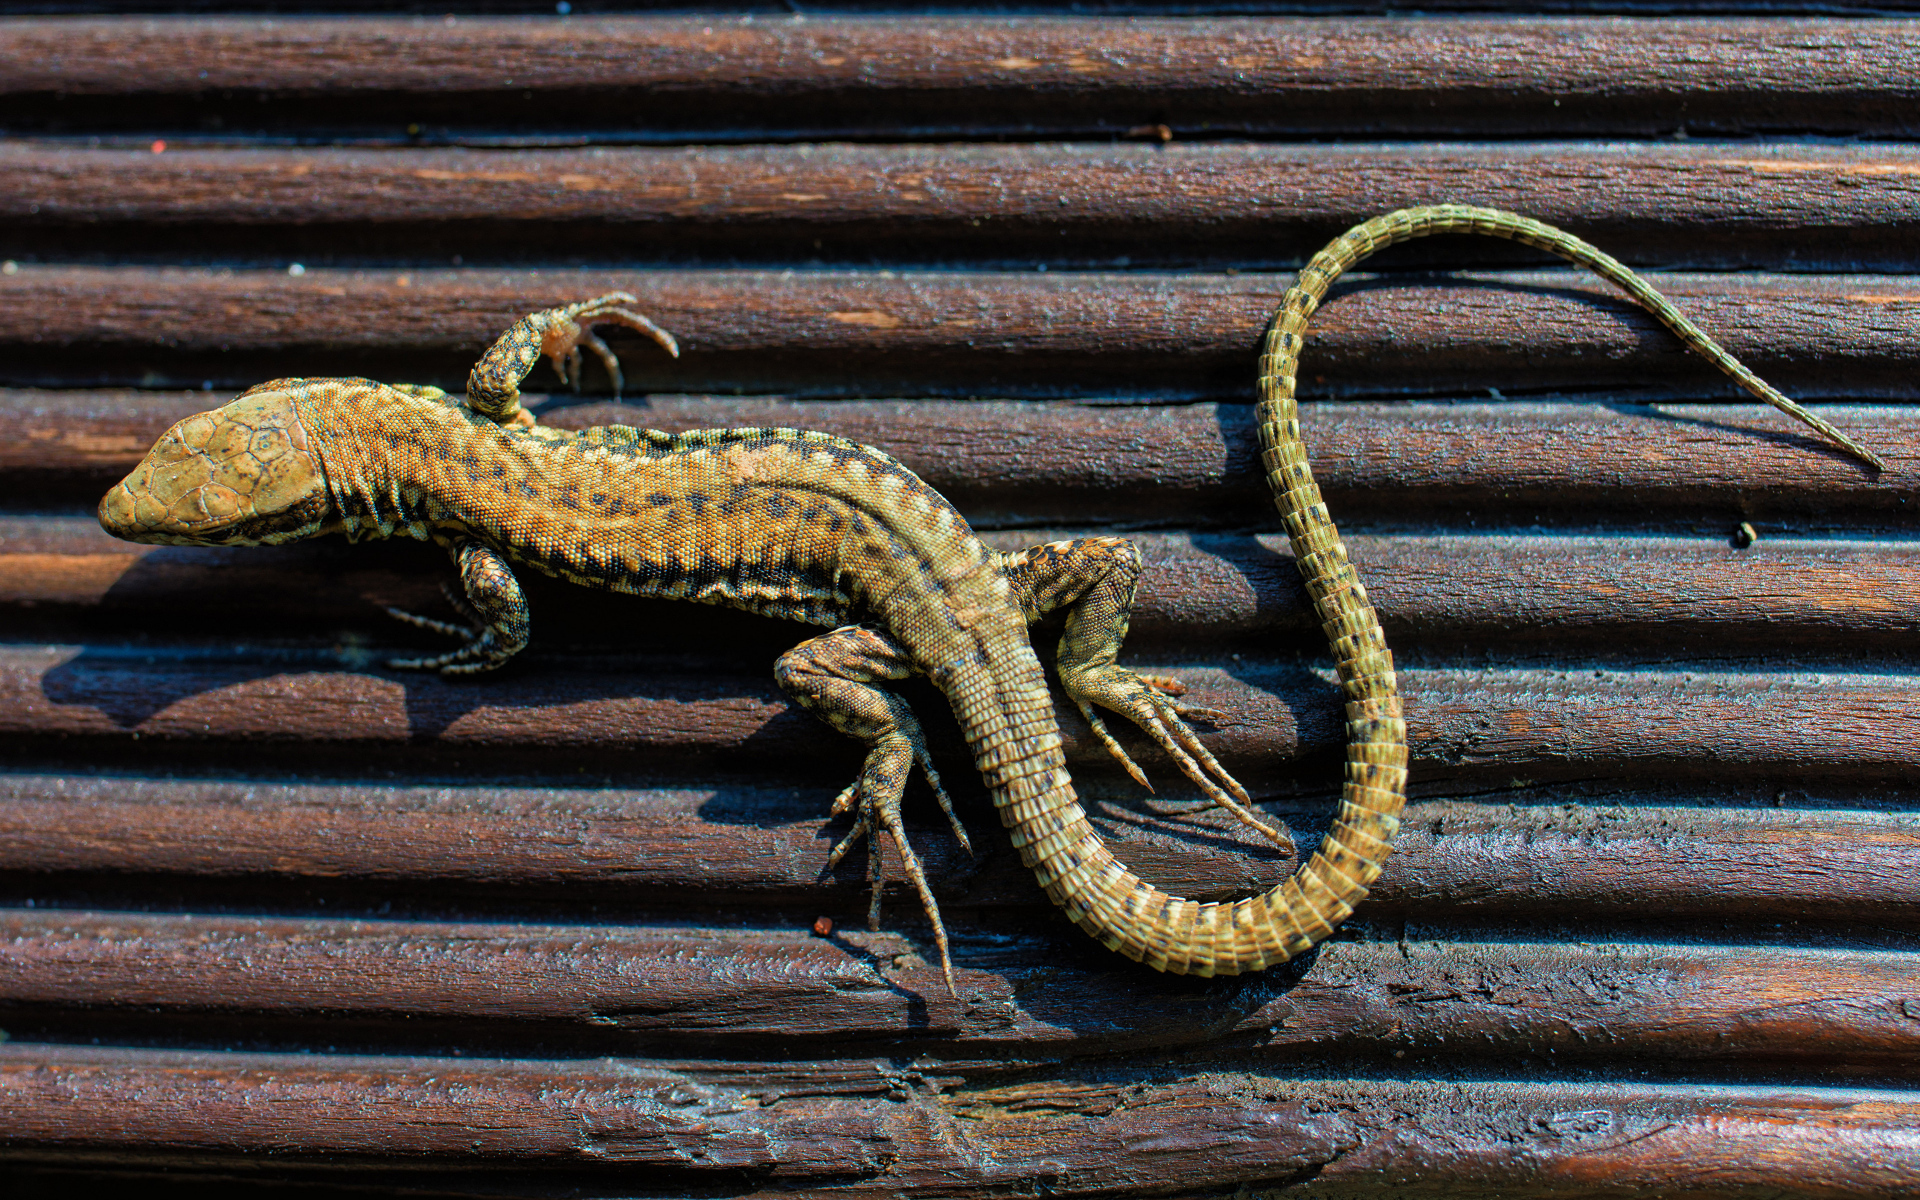 Large lizard on a wooden bench